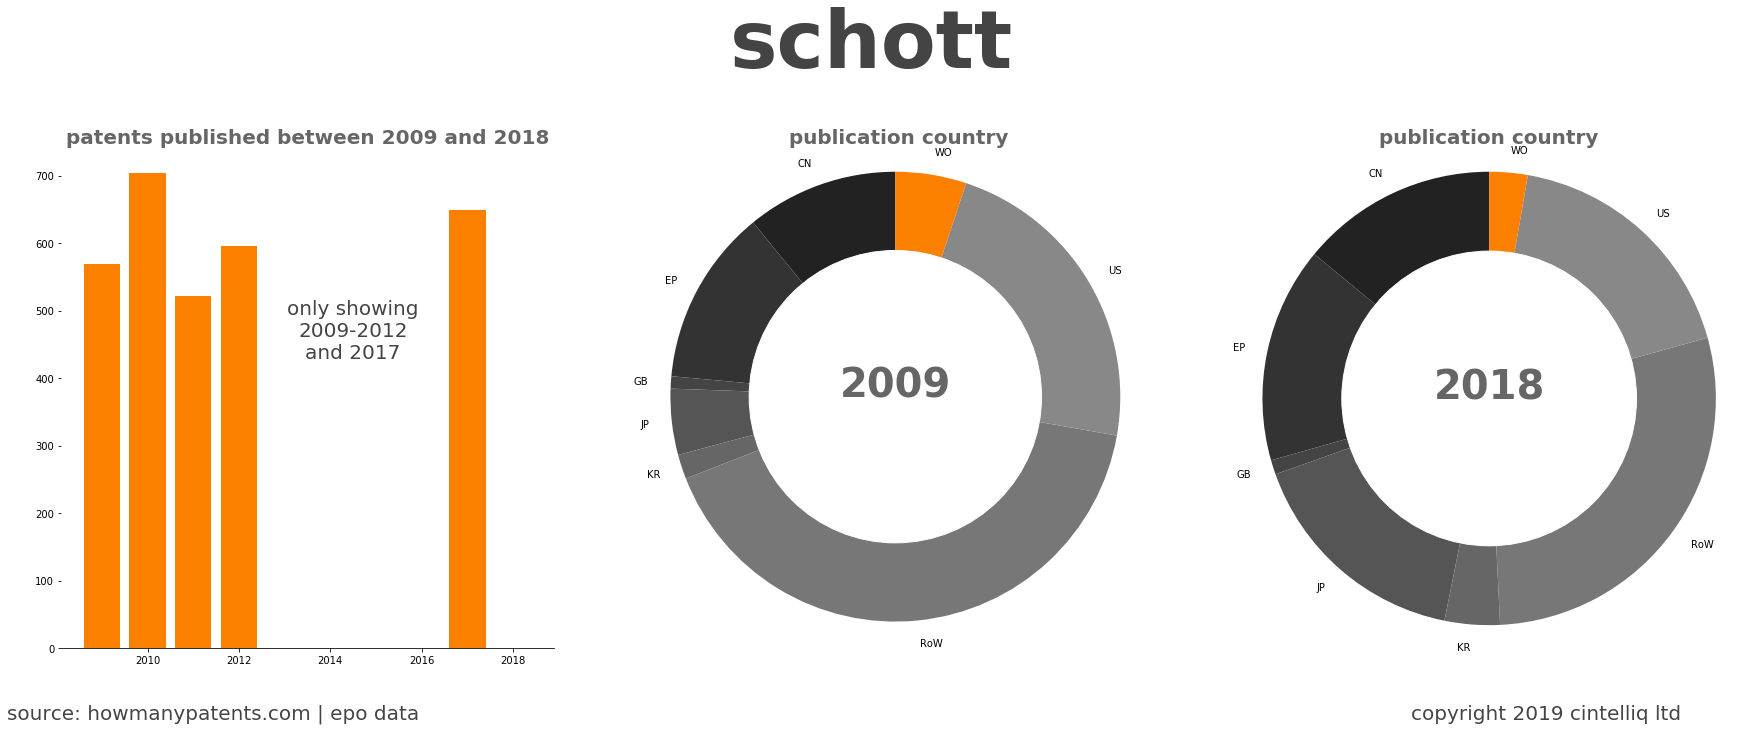 summary of patents for Schott